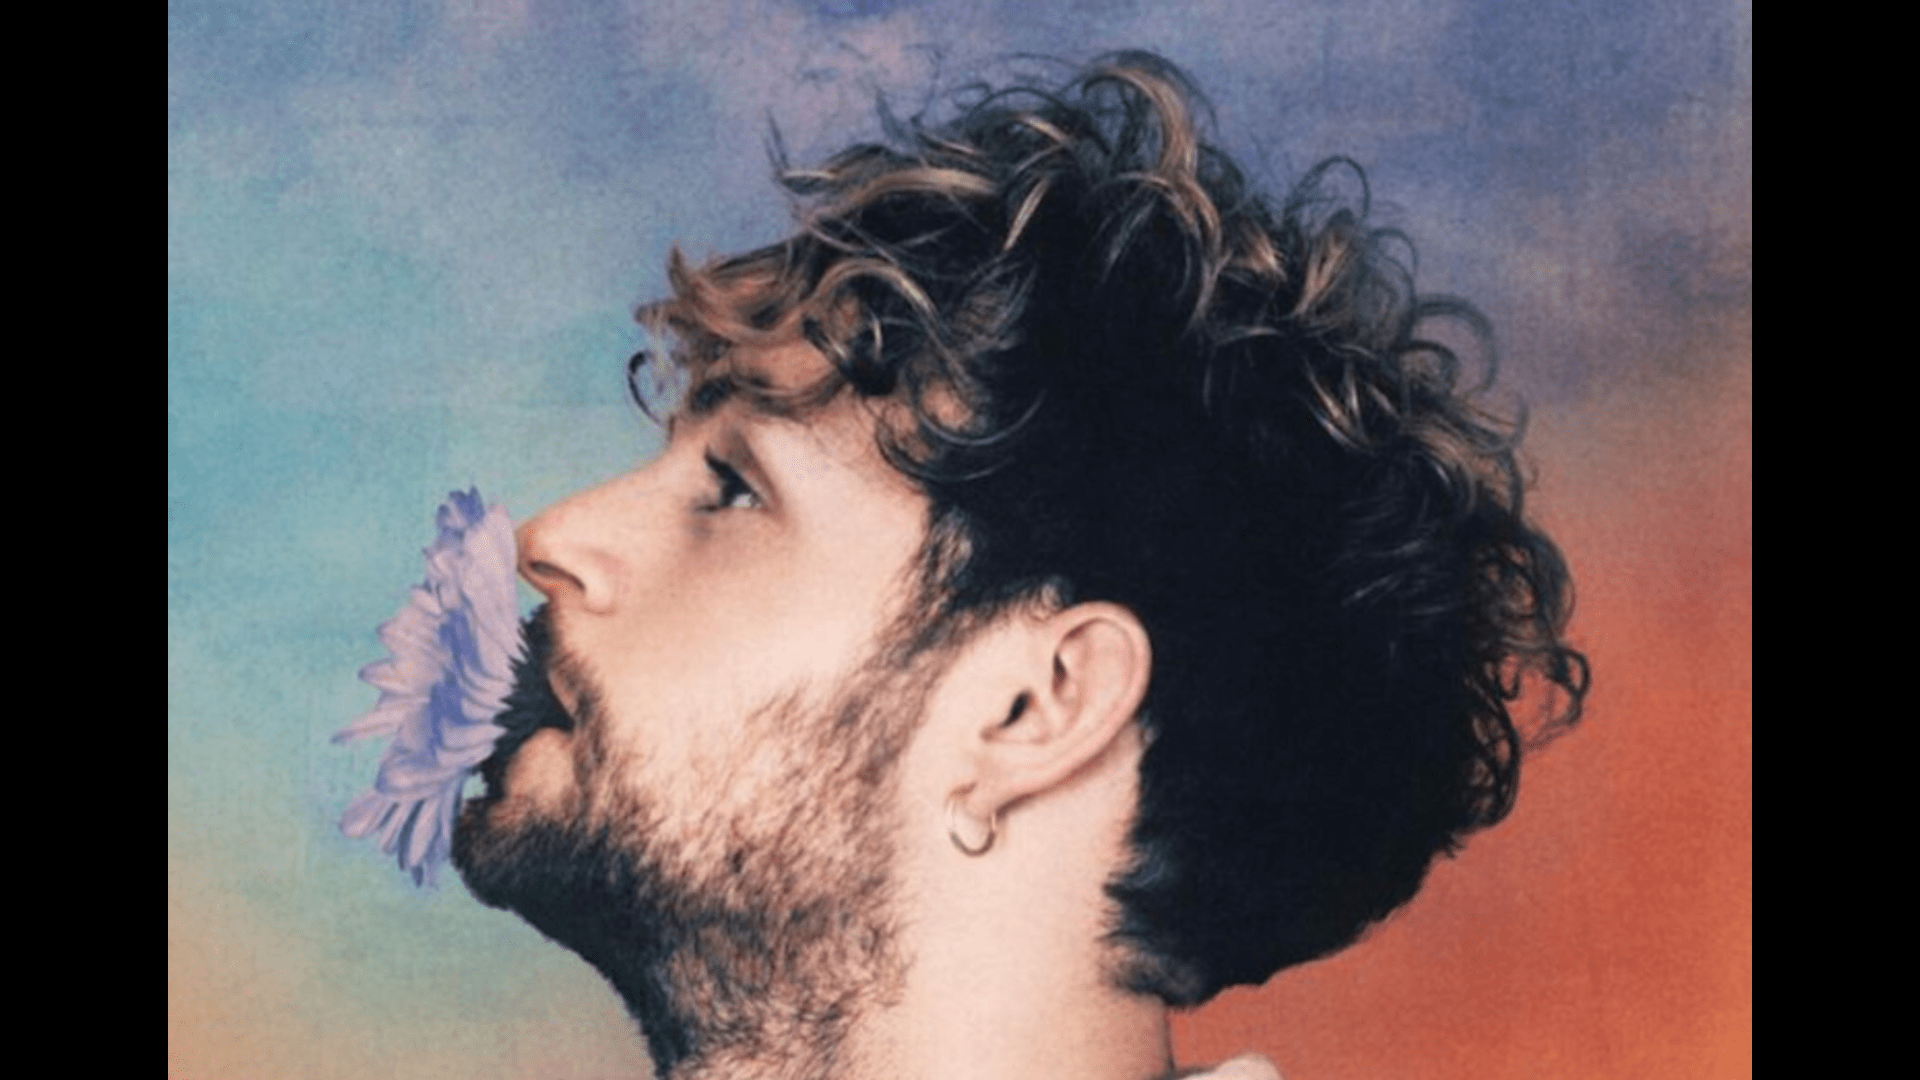 Singer Tom Grennan hospitalized after a robbery attack